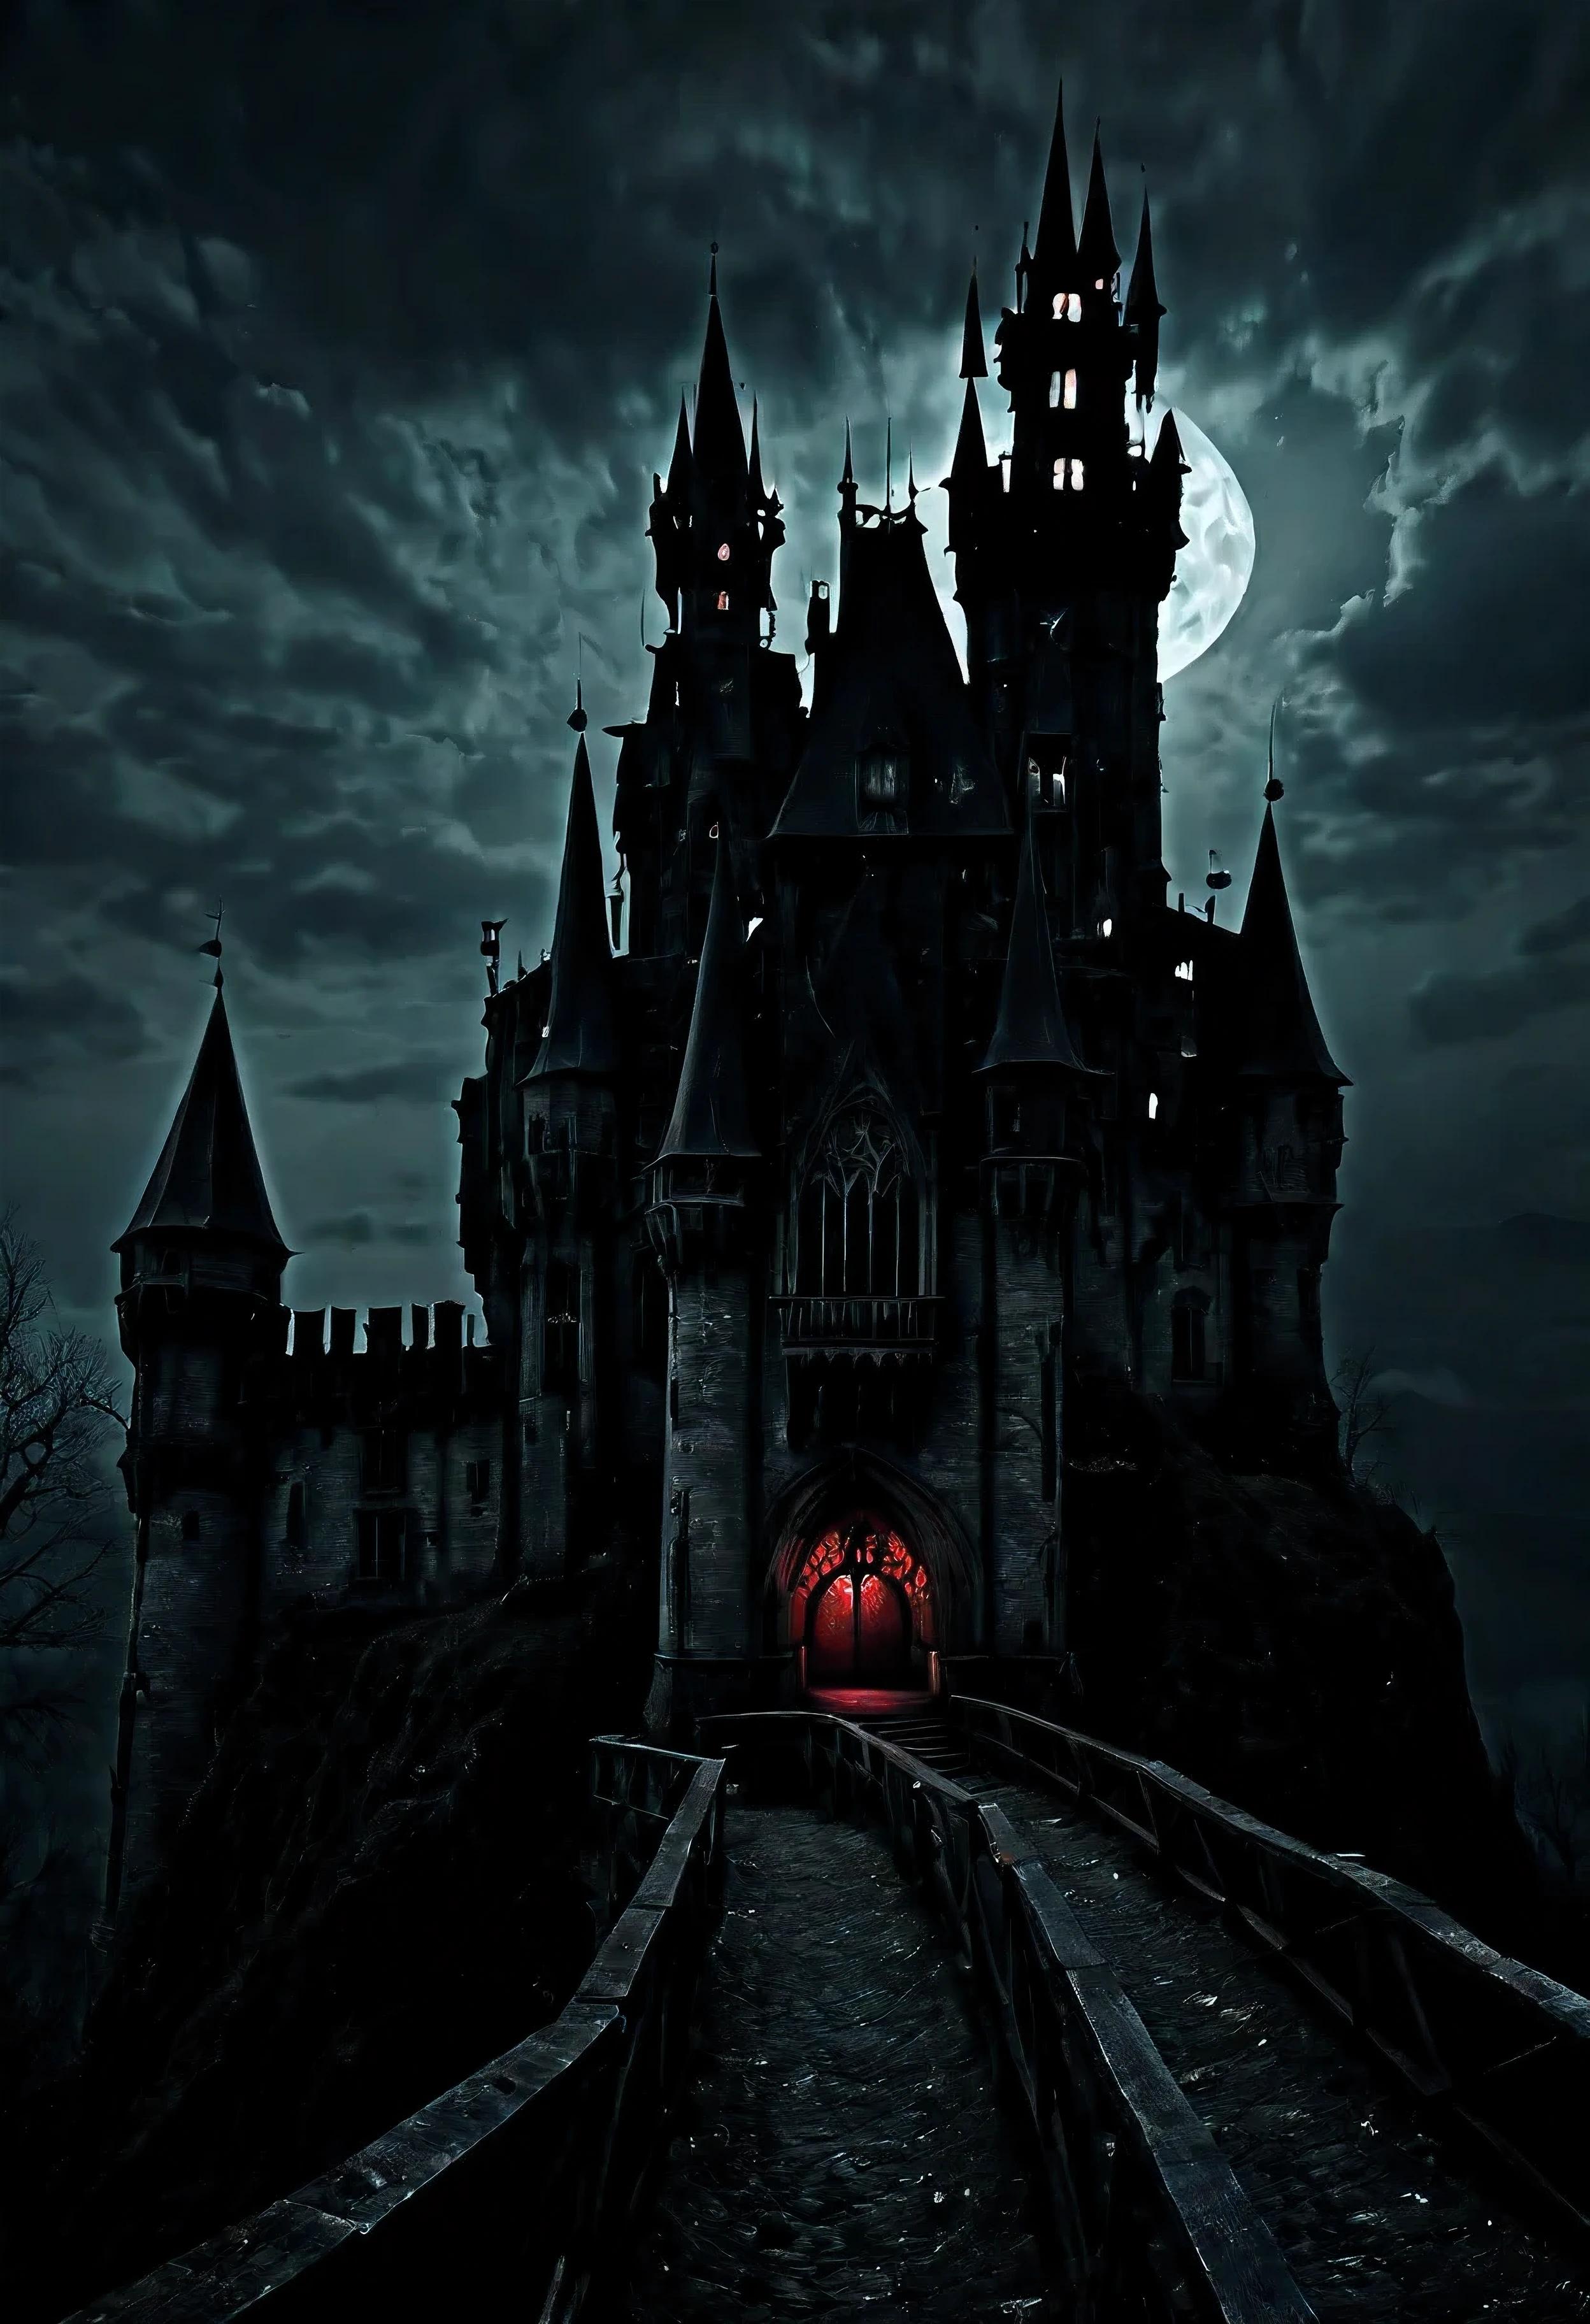 (main subject) eerie places, horror movie setting, Dracula castle style (material) dark and haunting illustrations, gothic, mysterious (additional details) foggy atmosphere, creepy shadows, eerie sounds echoing, old and decaying architecture, moonlit sky (image quality) (best quality, highres), ultra-detailed, (photorealistic:1.37) (art style) horror, gothic, dark fantasy (color tone) dark and desaturated with pops of deep red (light) dimly lit by flickering candlelight, casting eerie and elongated shadows